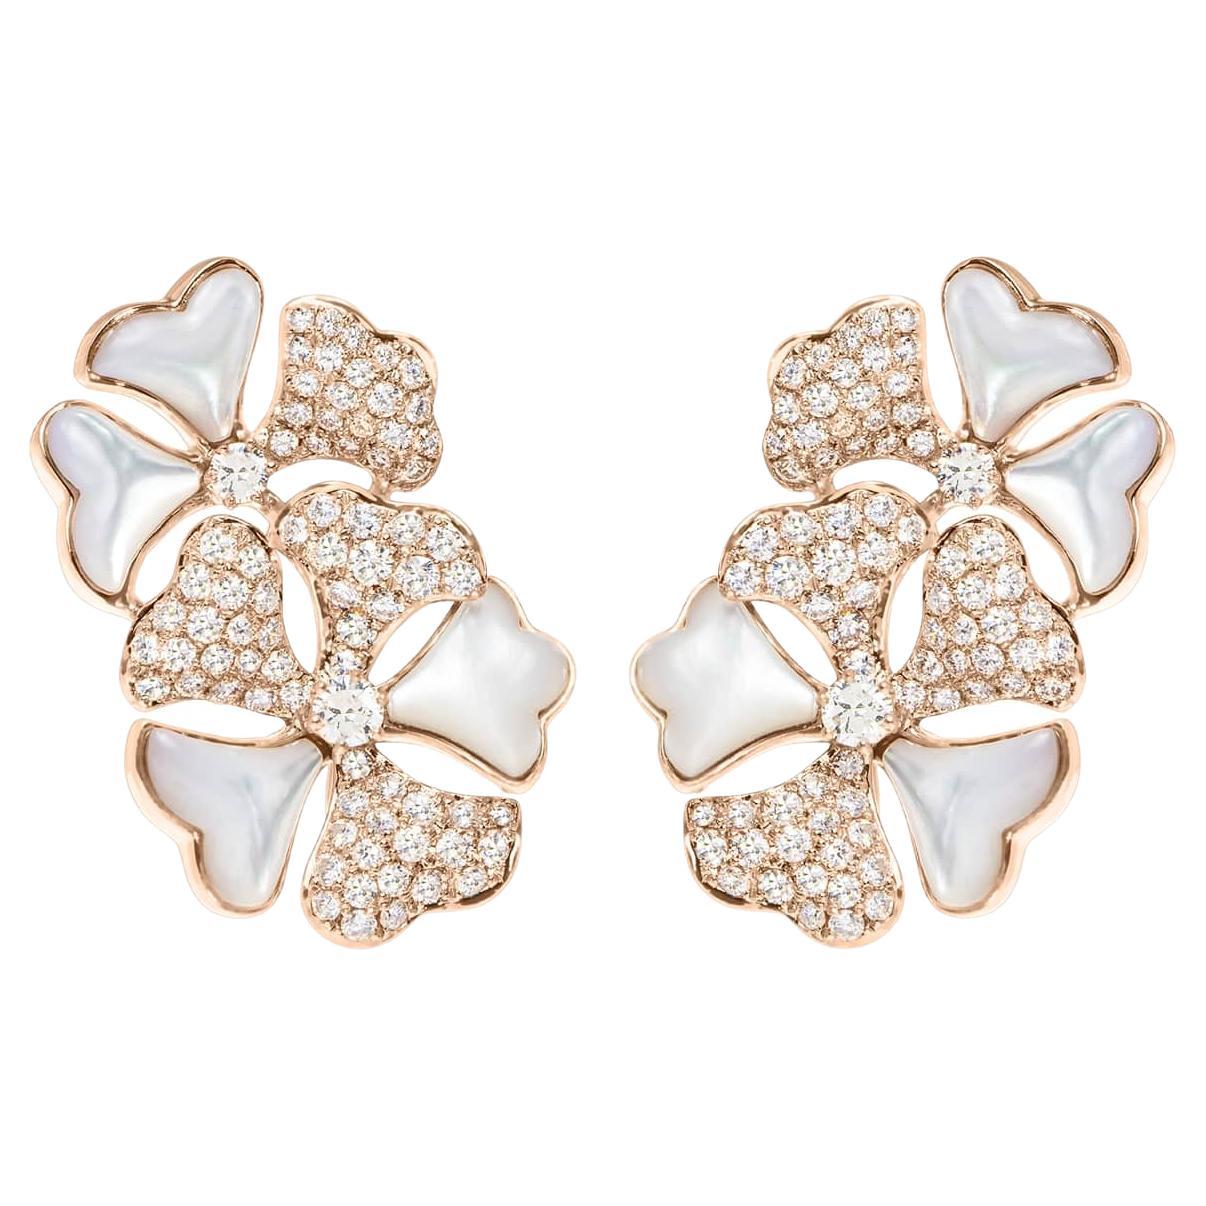 Bloom Diamond and White Mother of Pearl Cluster Earrings in 18k Rose Gold